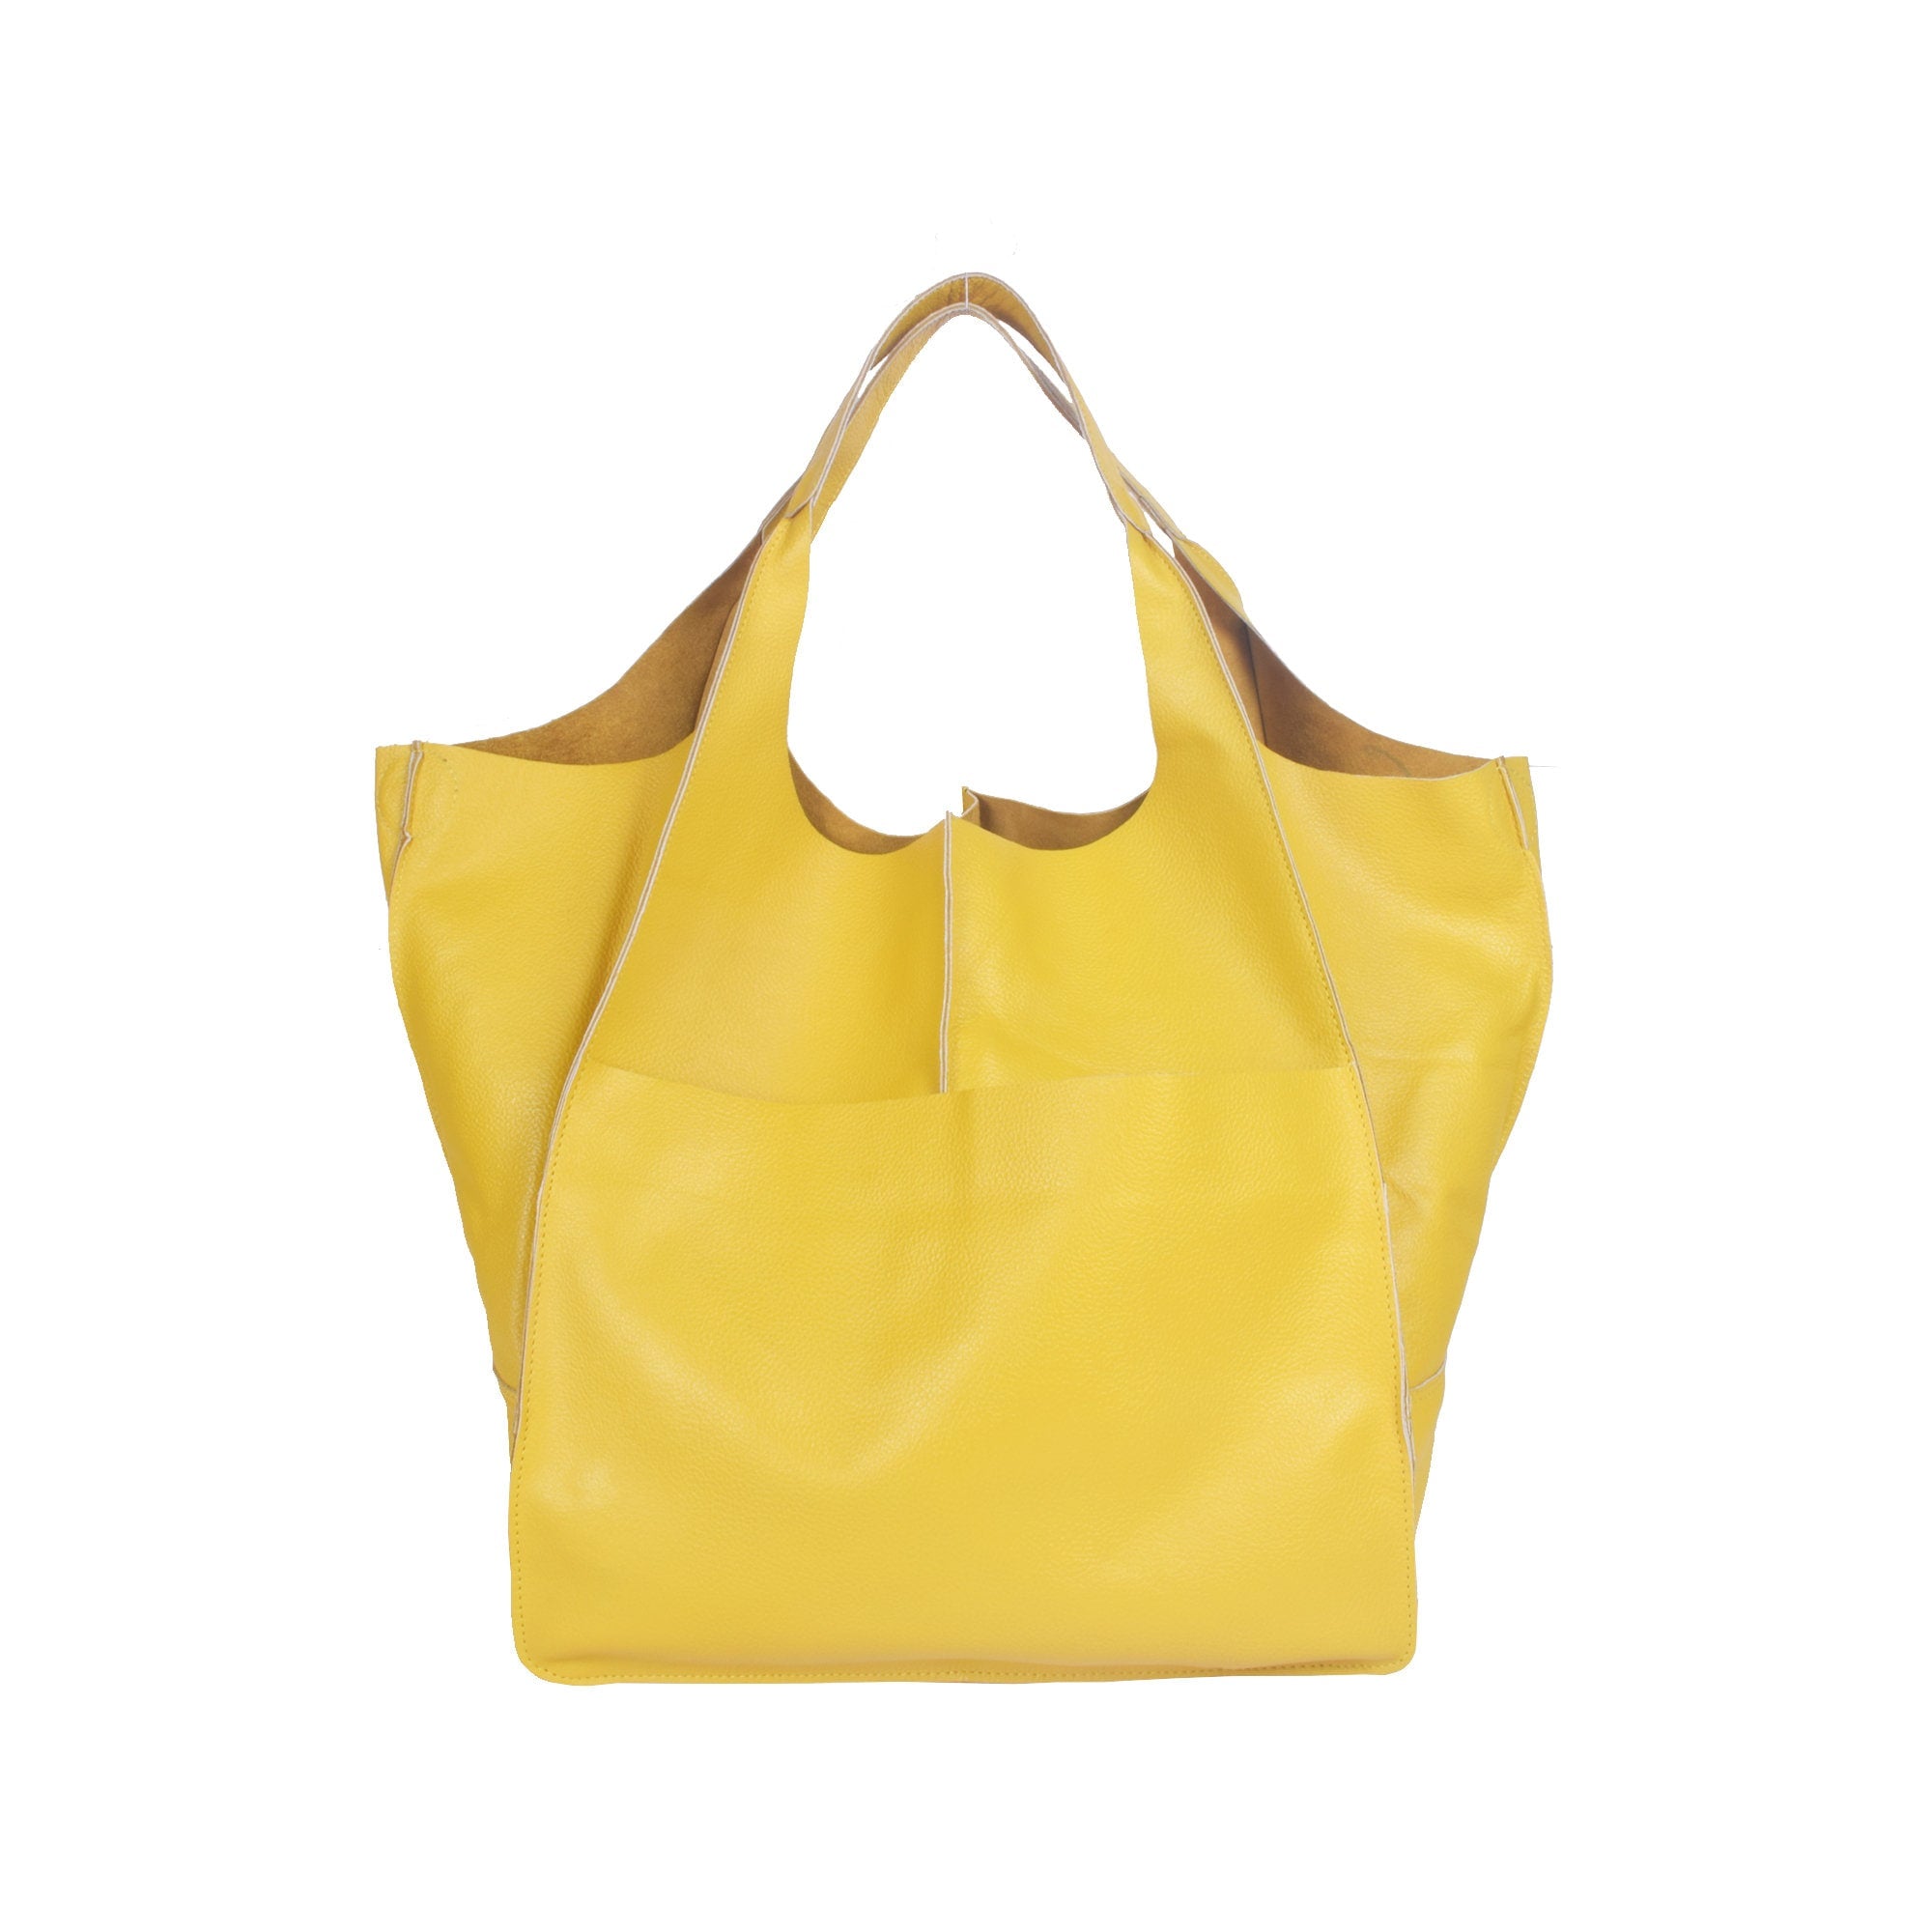 The Oversized Leather Tote Bag – WP Standard